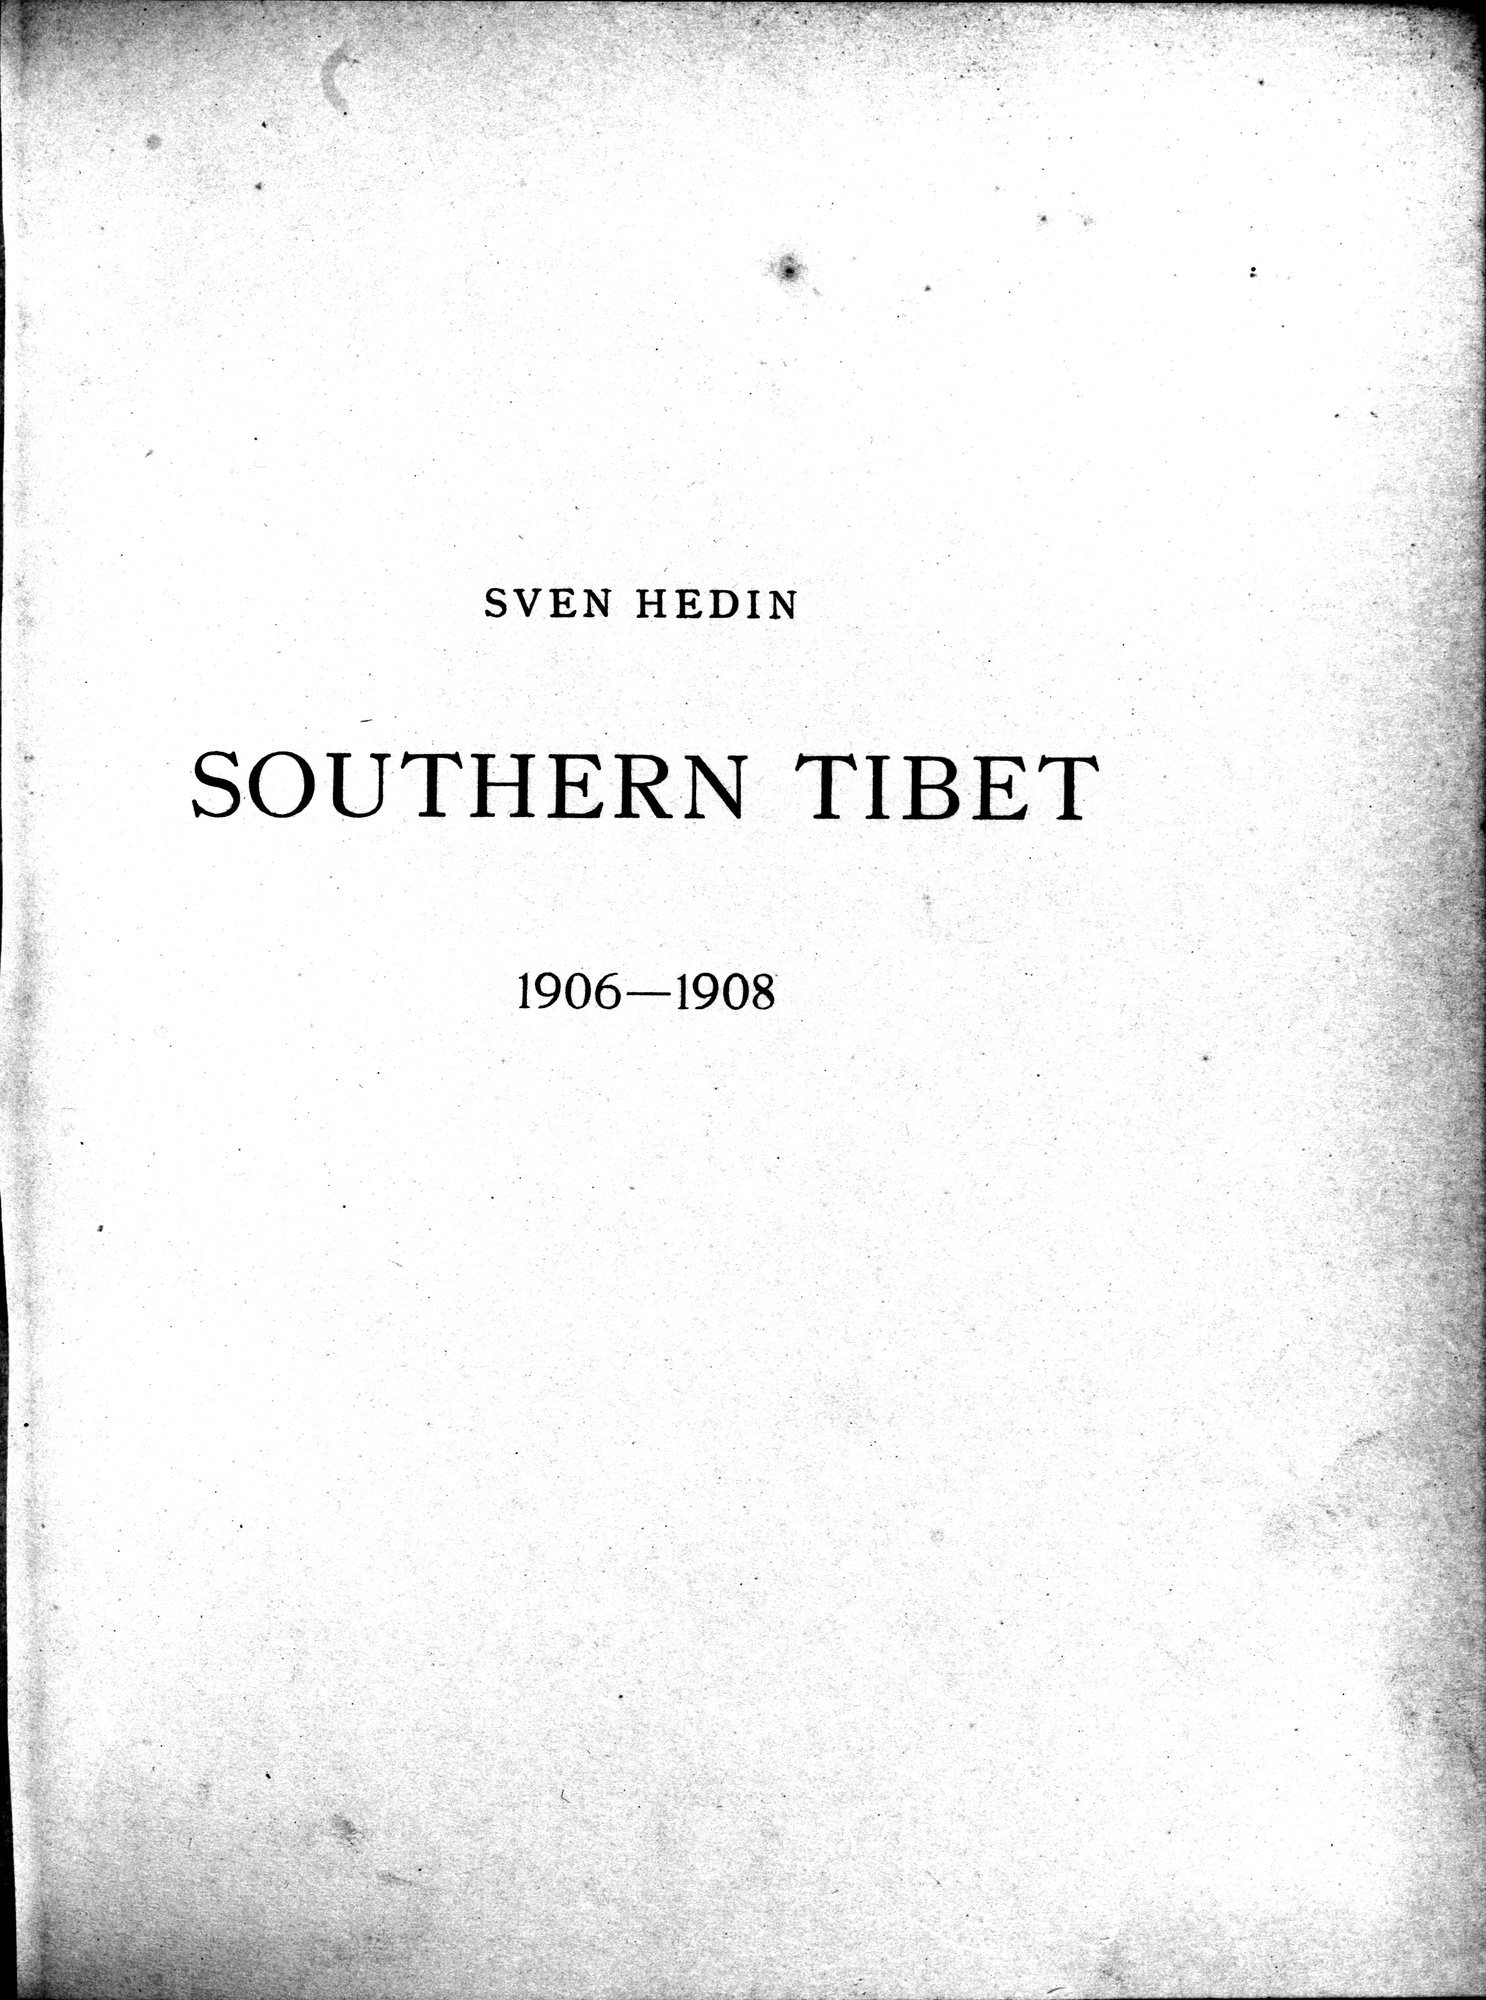 Southern Tibet : vol.4 / Page 9 (Grayscale High Resolution Image)